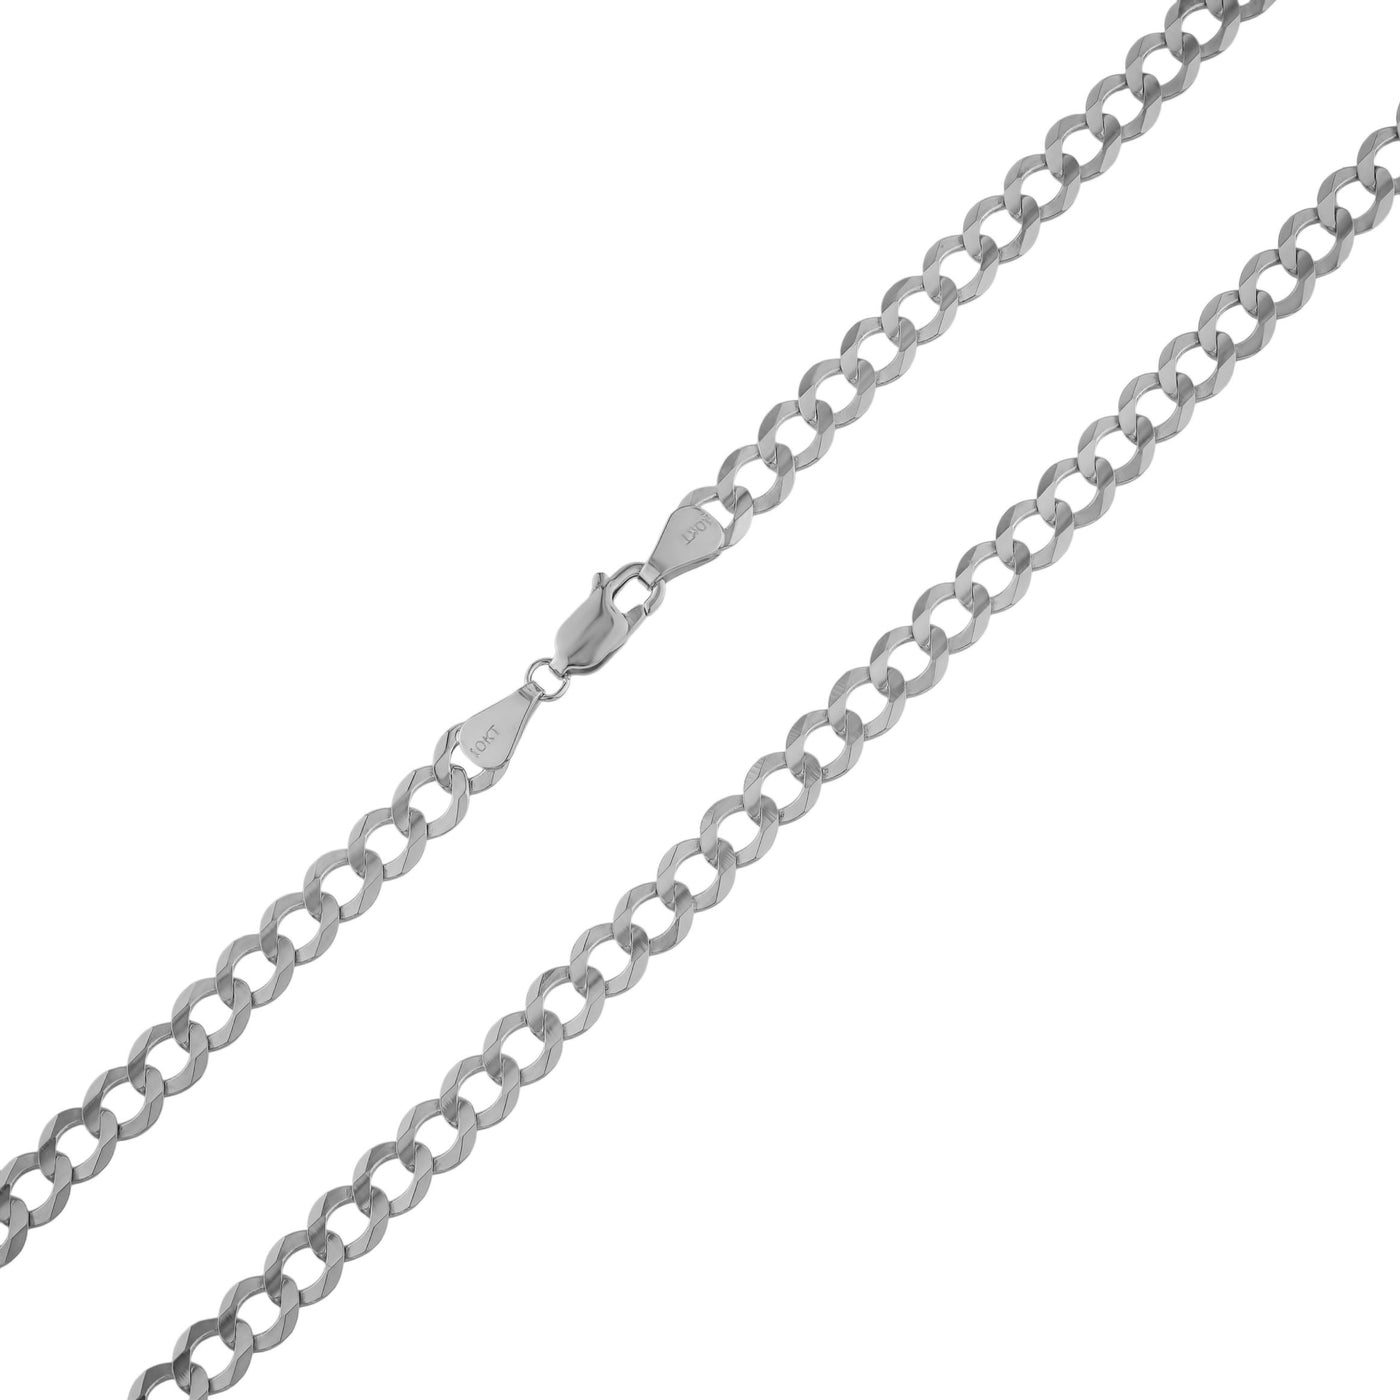 Women's Miami Curb Link Chain Necklace 14K White Gold - Solid